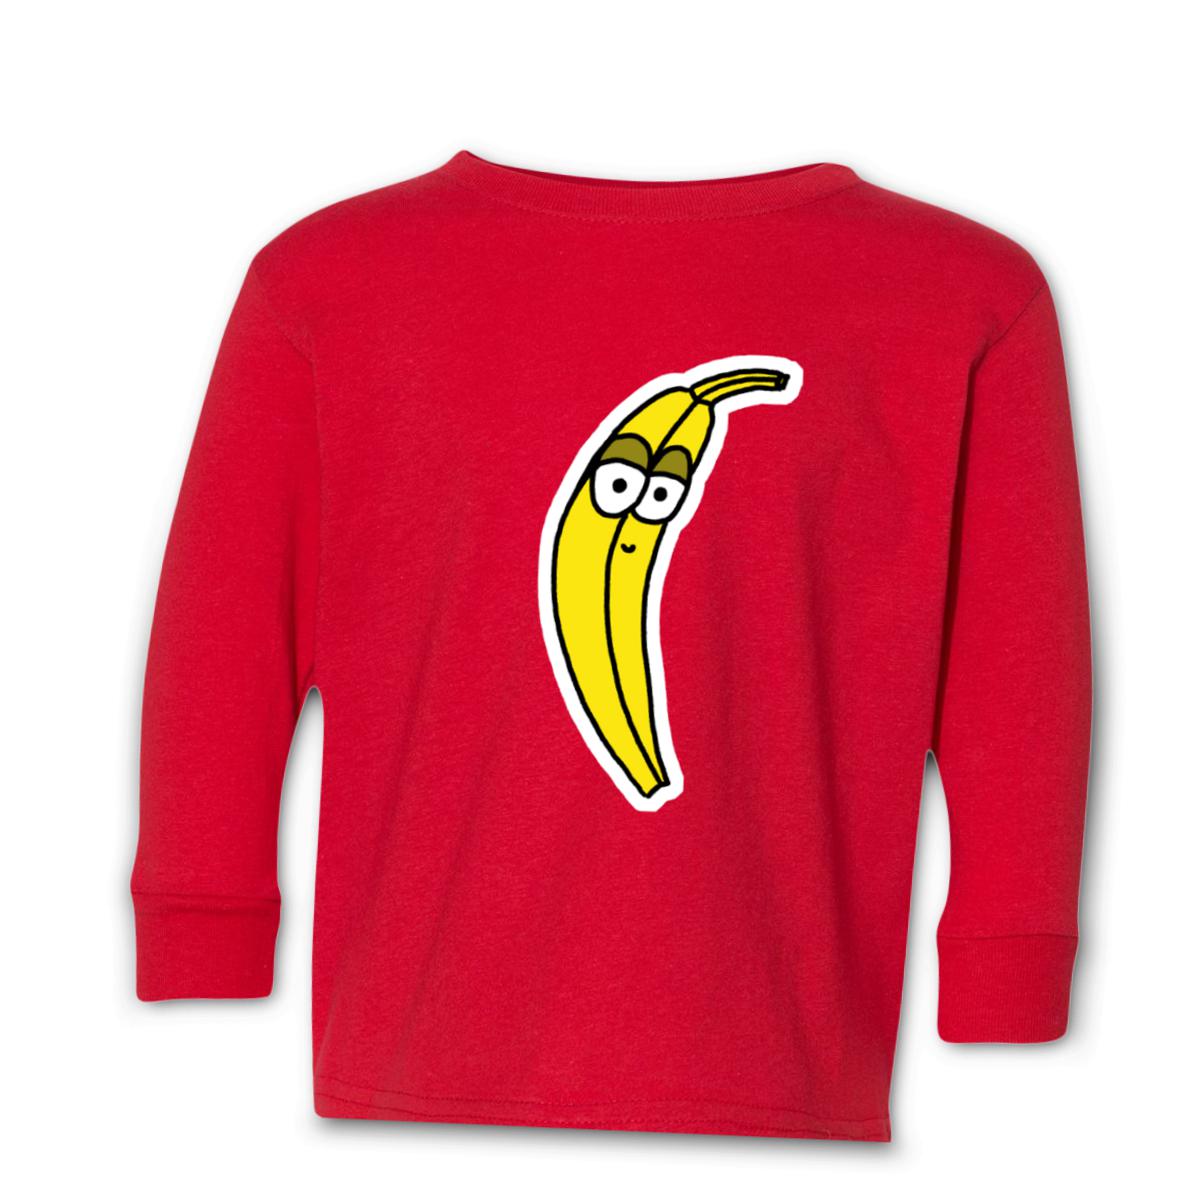 Plantain Toddler Long Sleeve Tee 2T red